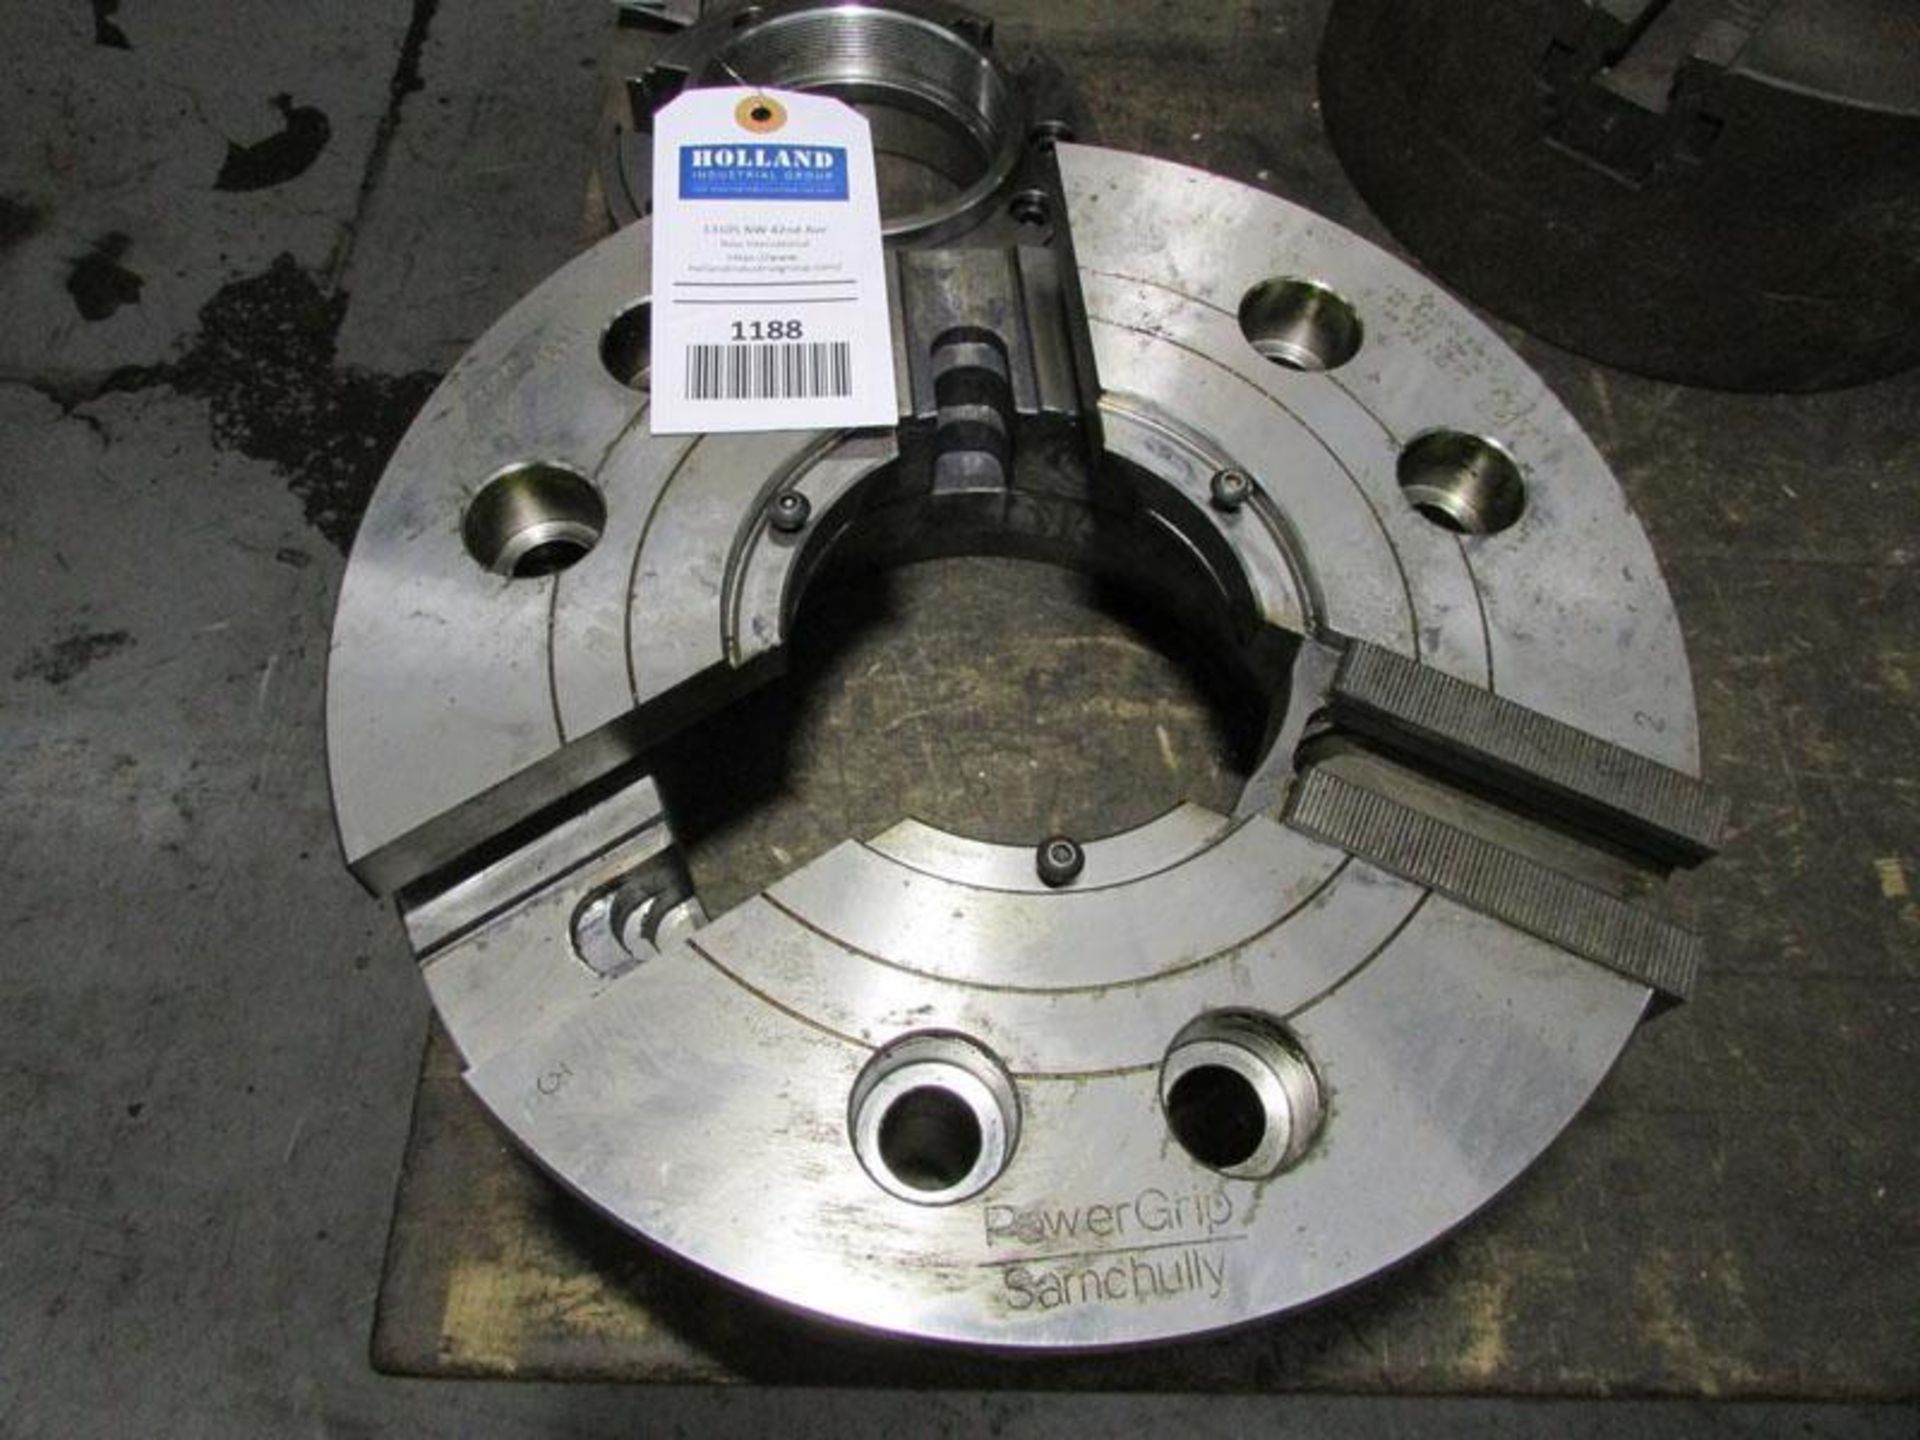 Power Grip HH-212 12" 3-Jaw Hydraulic Chuck - Image 2 of 2